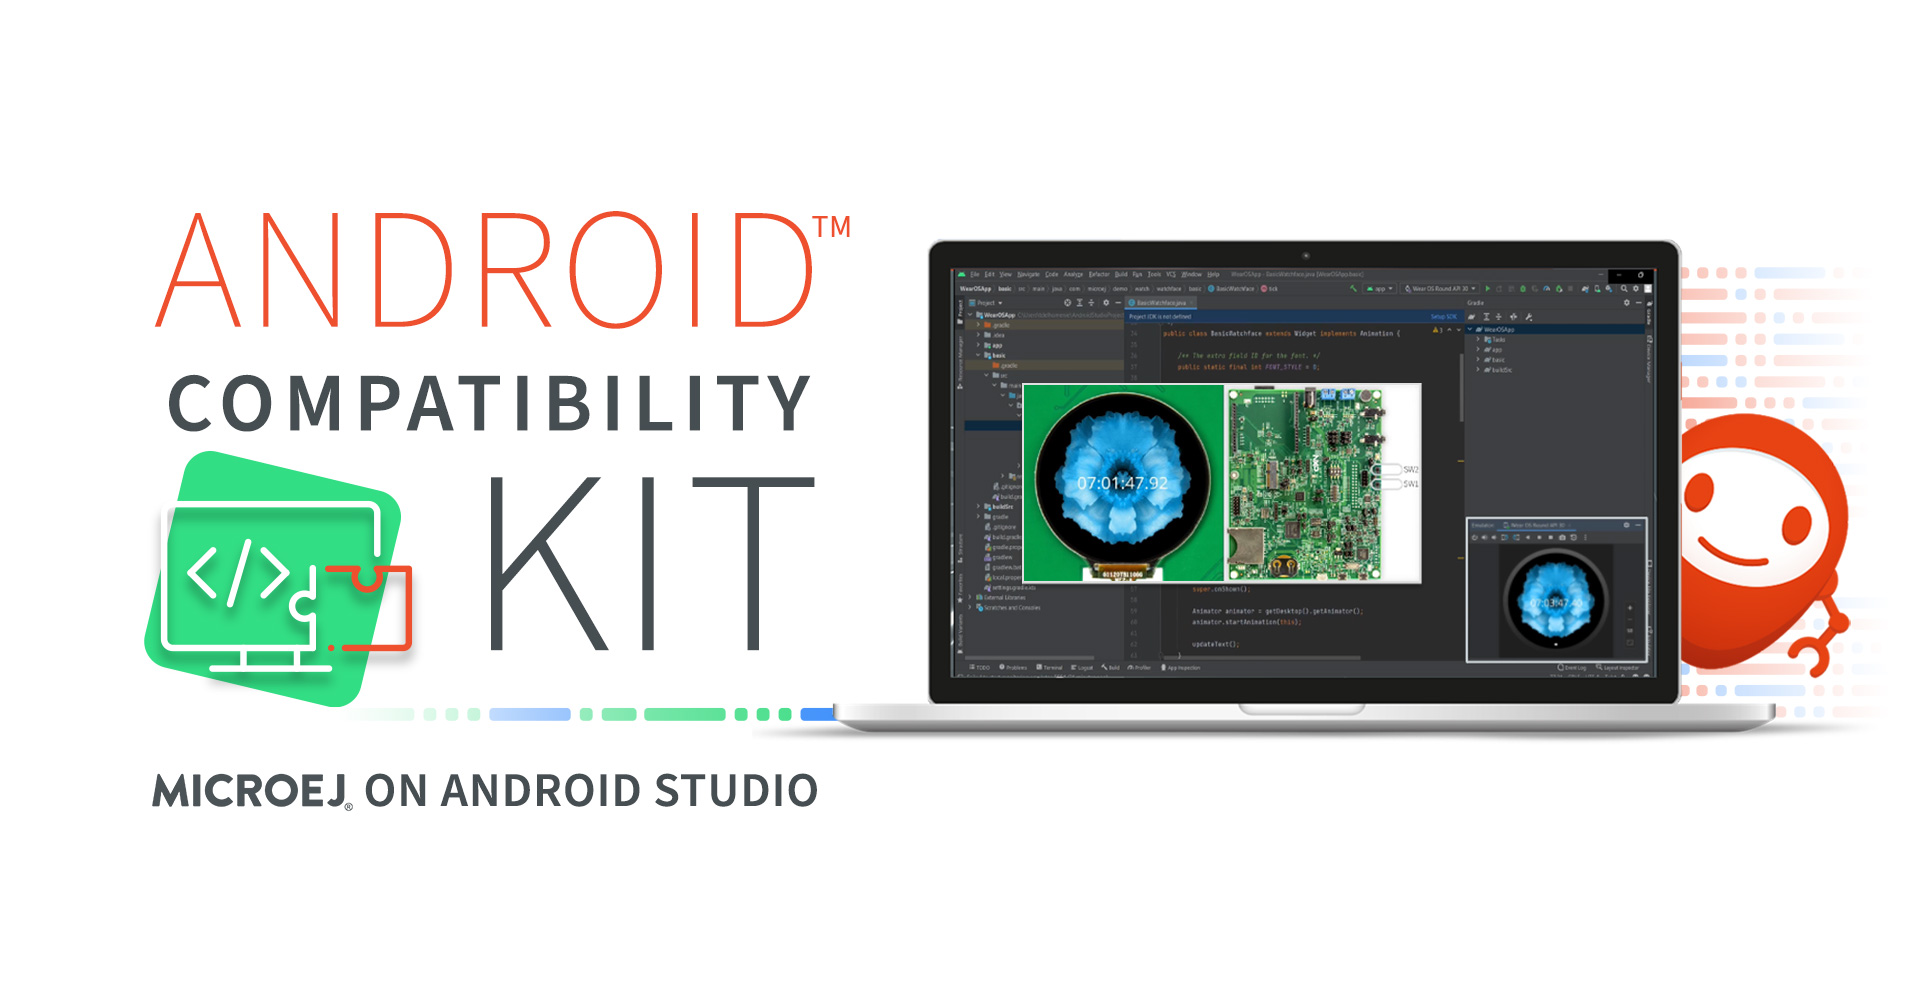 PR_header_android-compatibility-kit